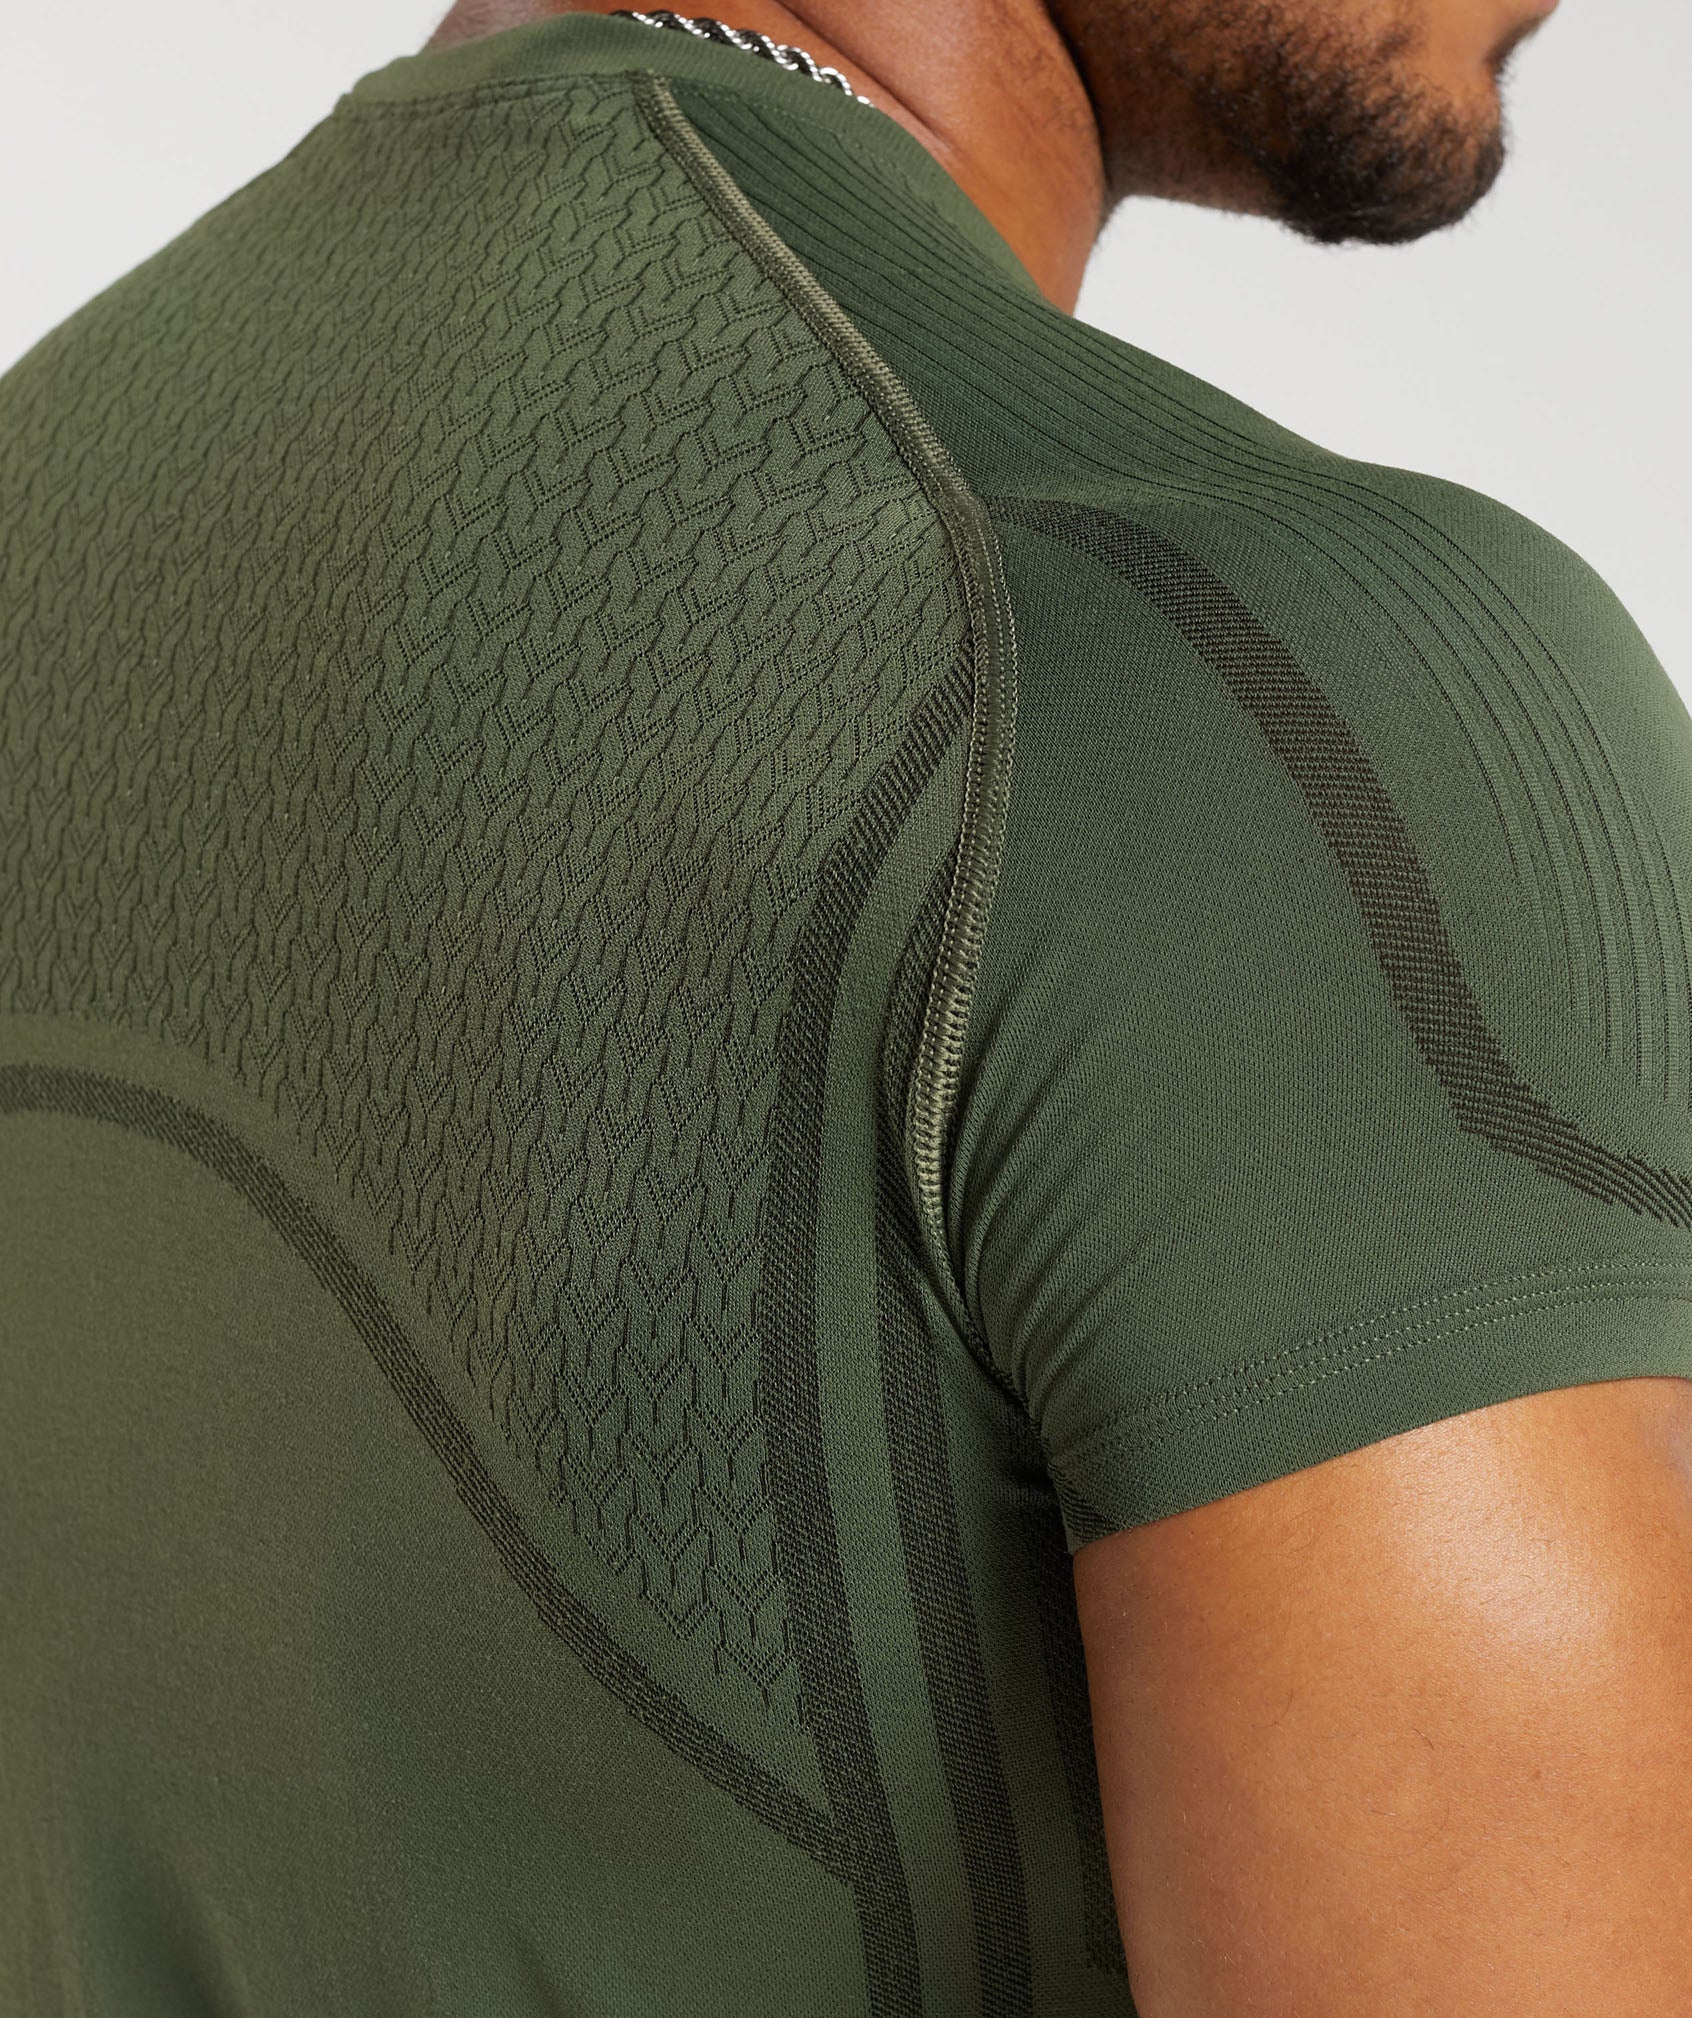 315 Seamless T-Shirt in Core Olive/Deep Olive Green - view 5